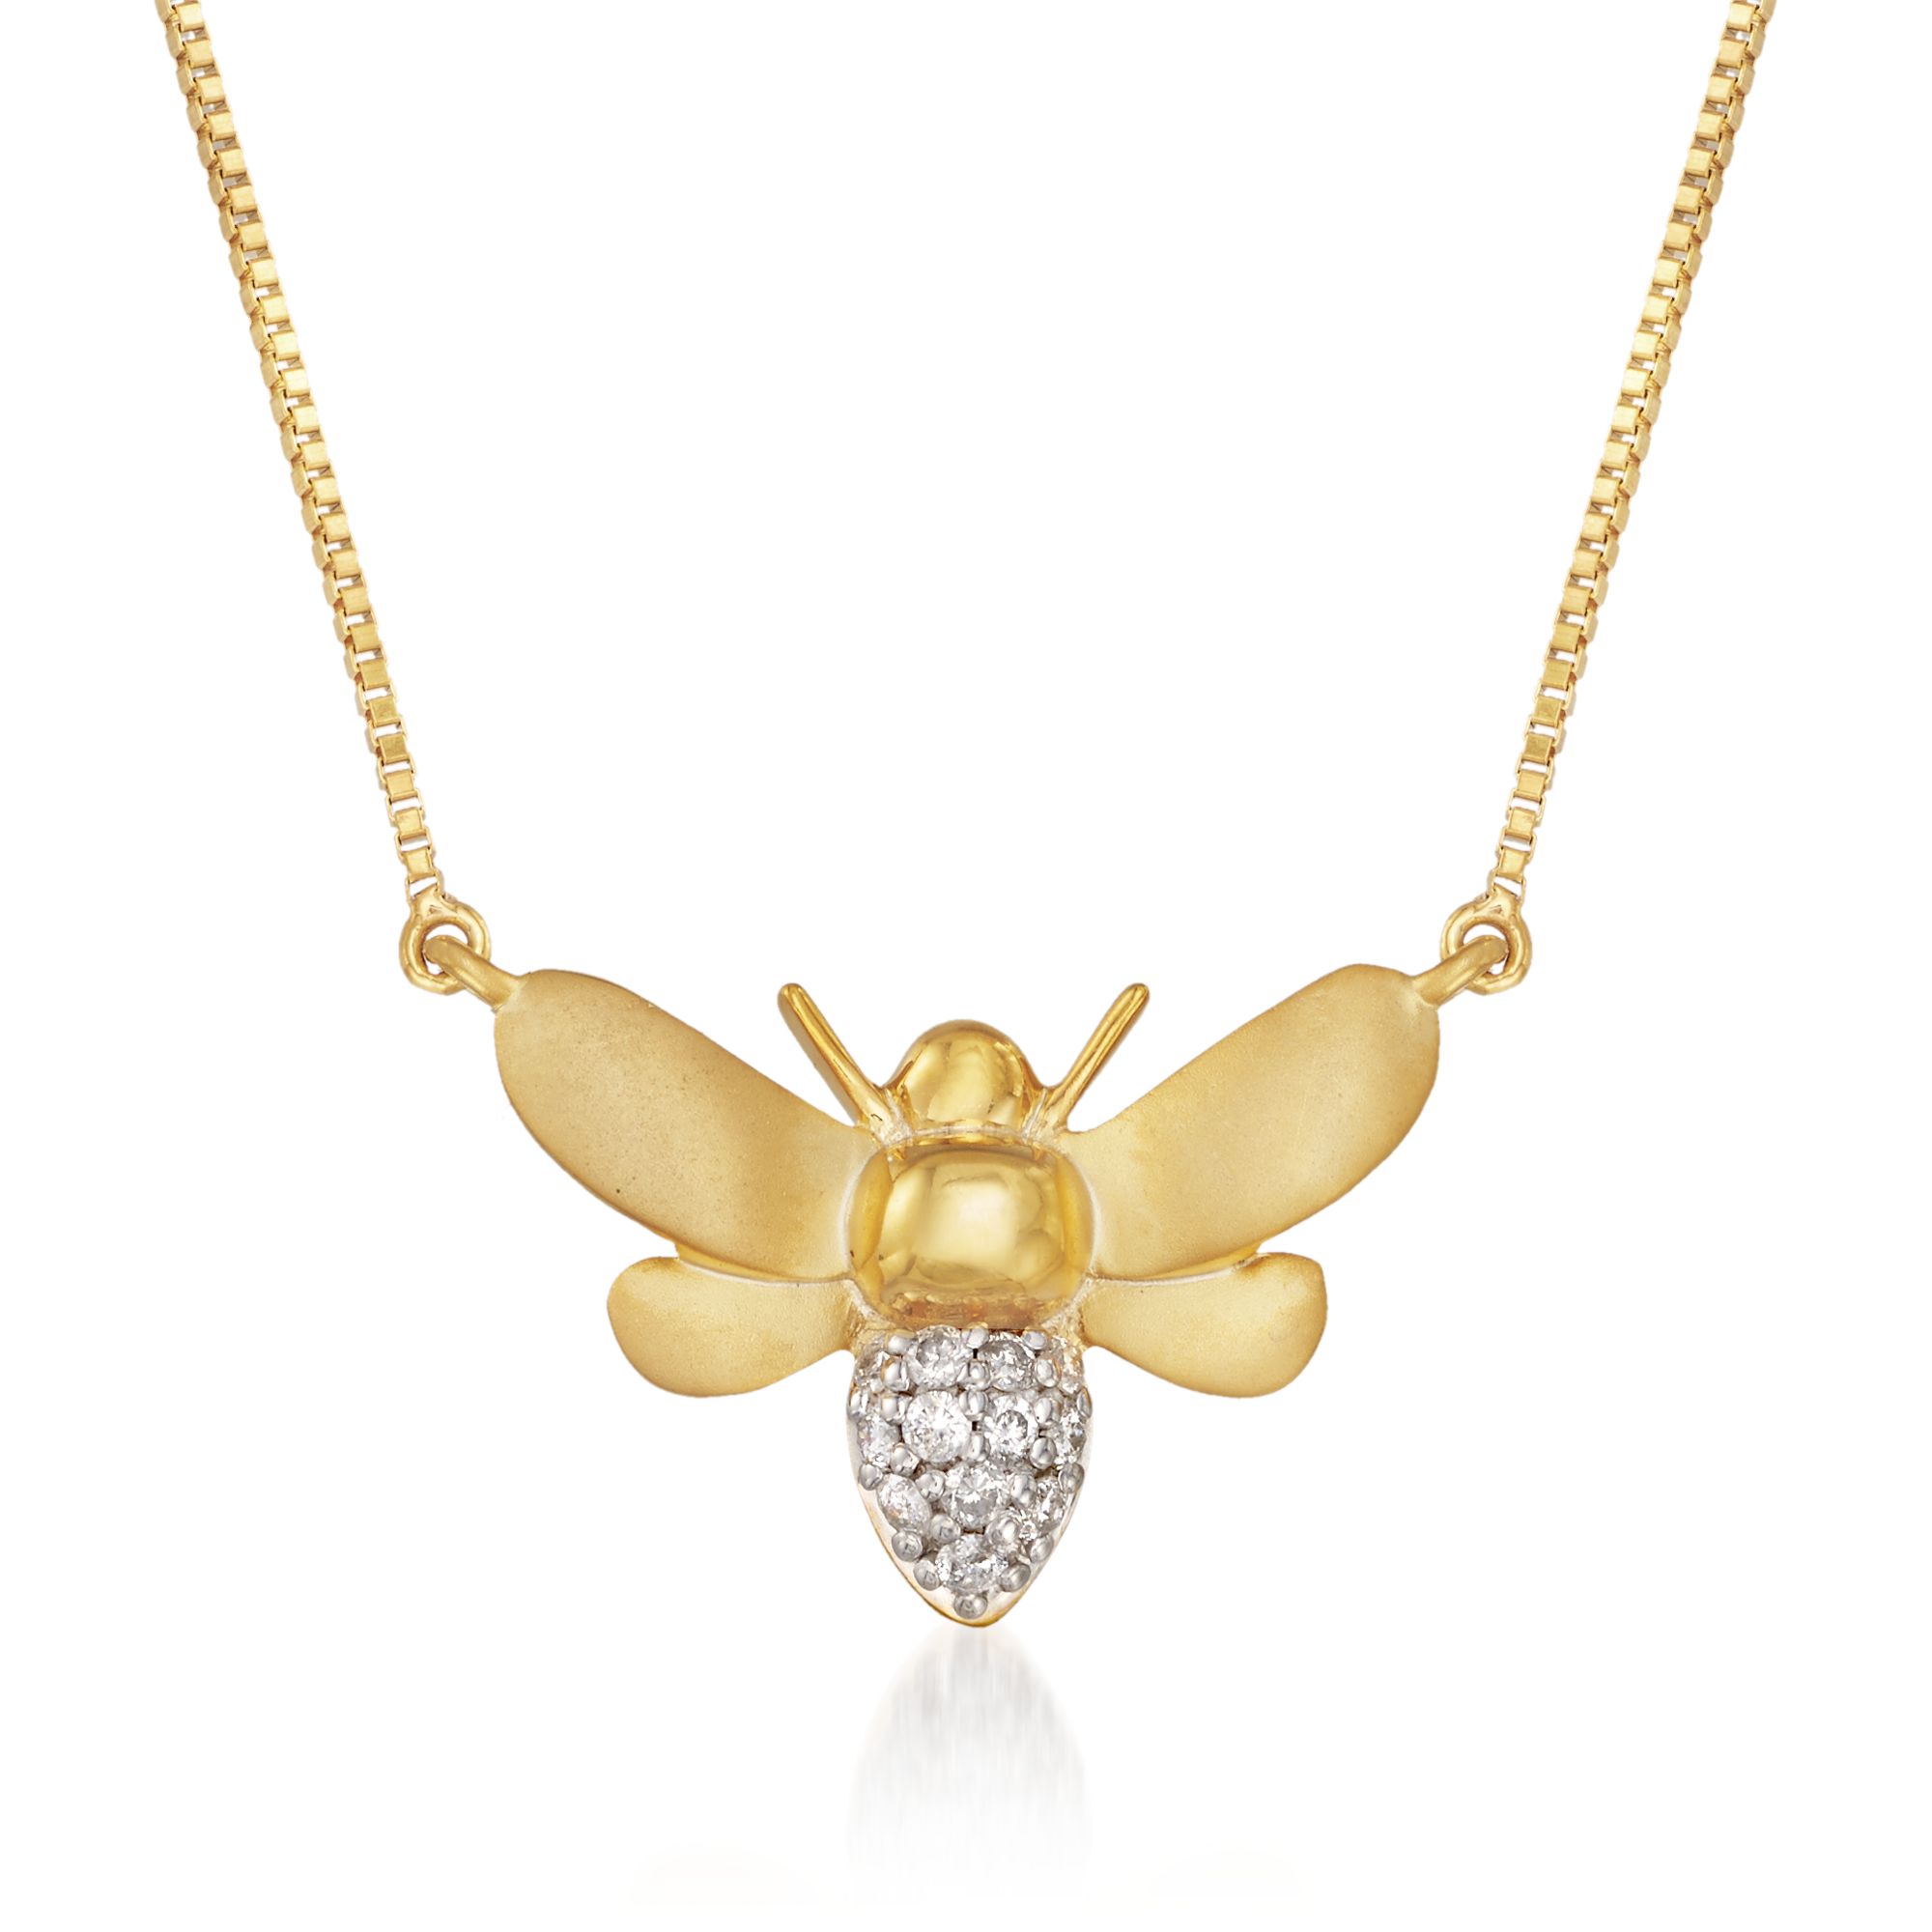 .10 ct. t.w. Diamond Bumblebee Necklace in 14kt Gold Over Sterling. 18